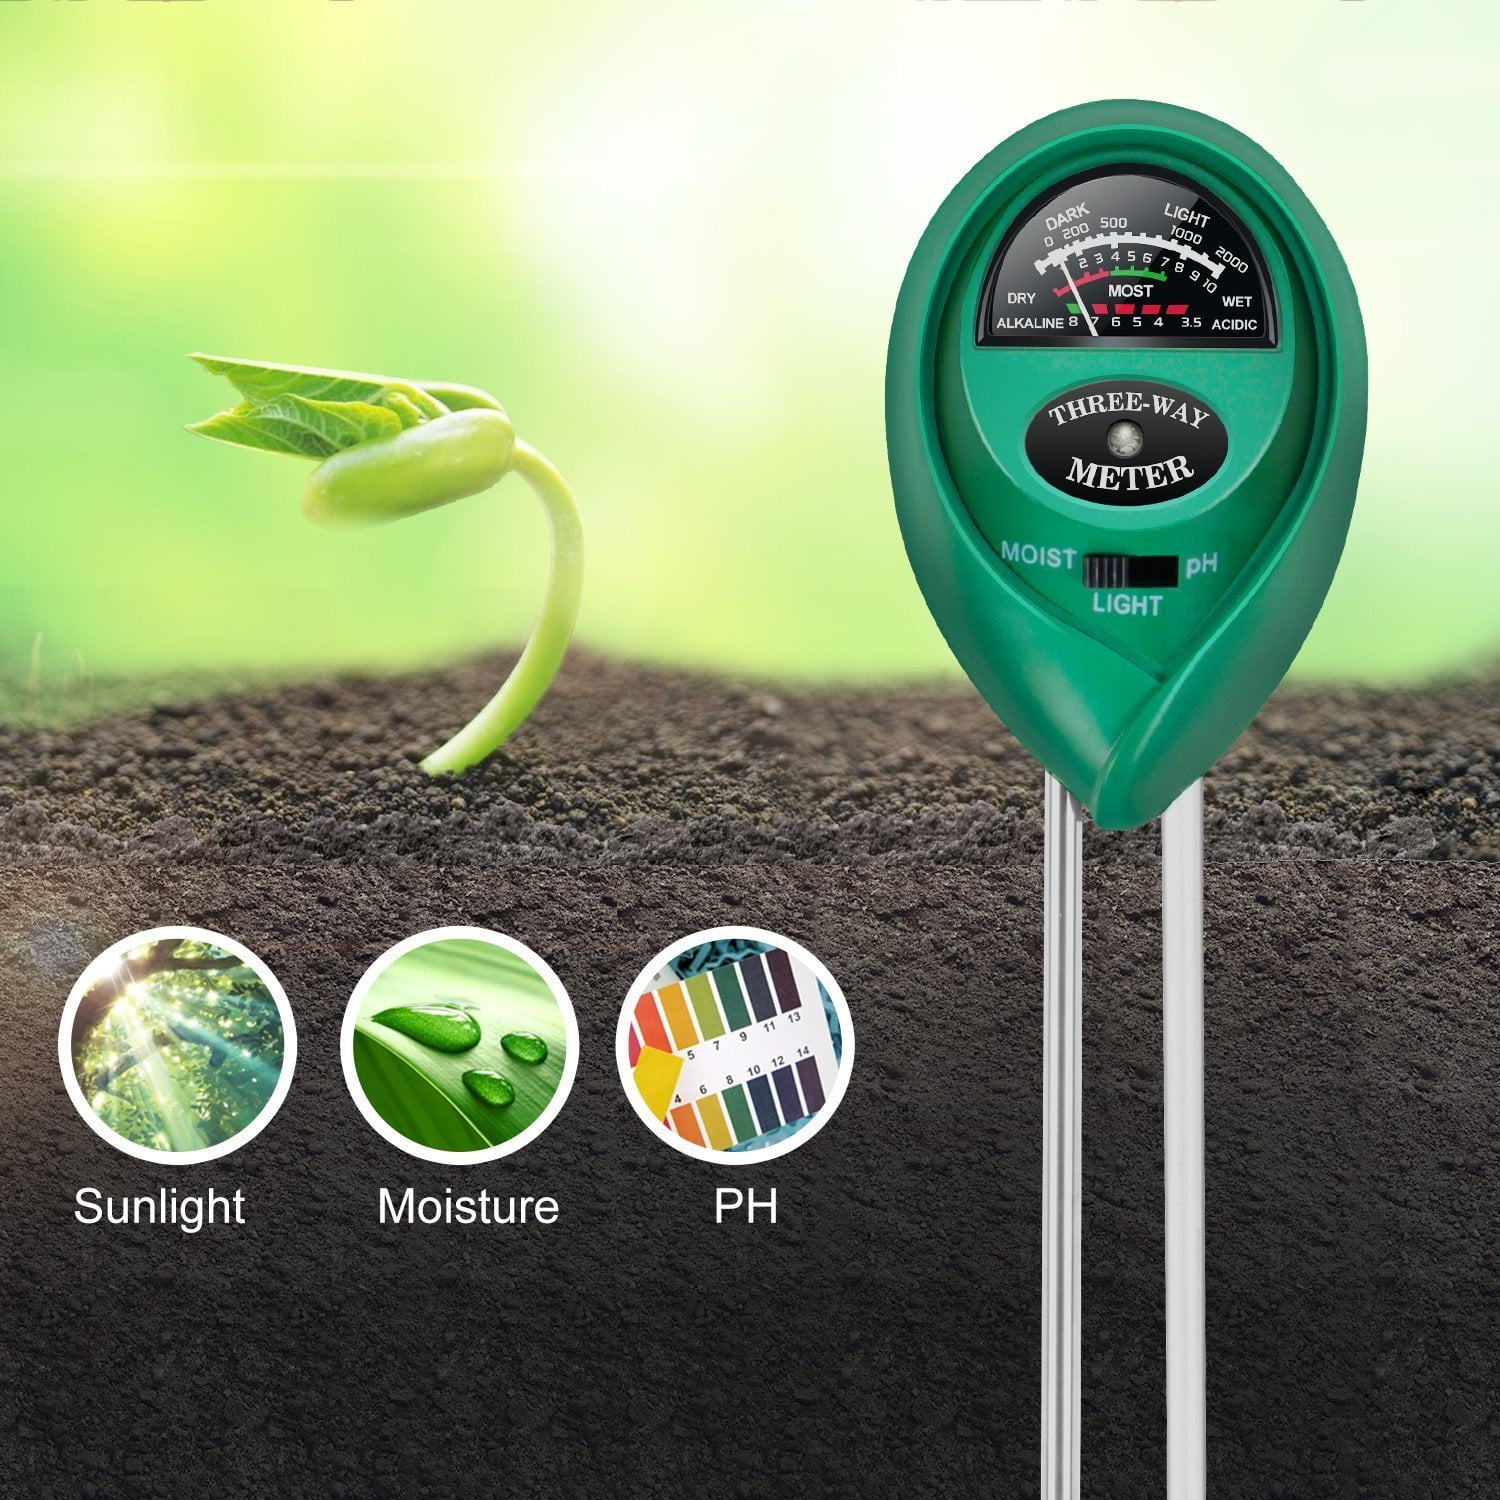 3-in-1 Soil Test Kit pH Lawn Farm Healthy Growth of Plants Indoor/Outdoor Testing Plus Free Gloves Garden Moisture and Light Meter Tester for Home 